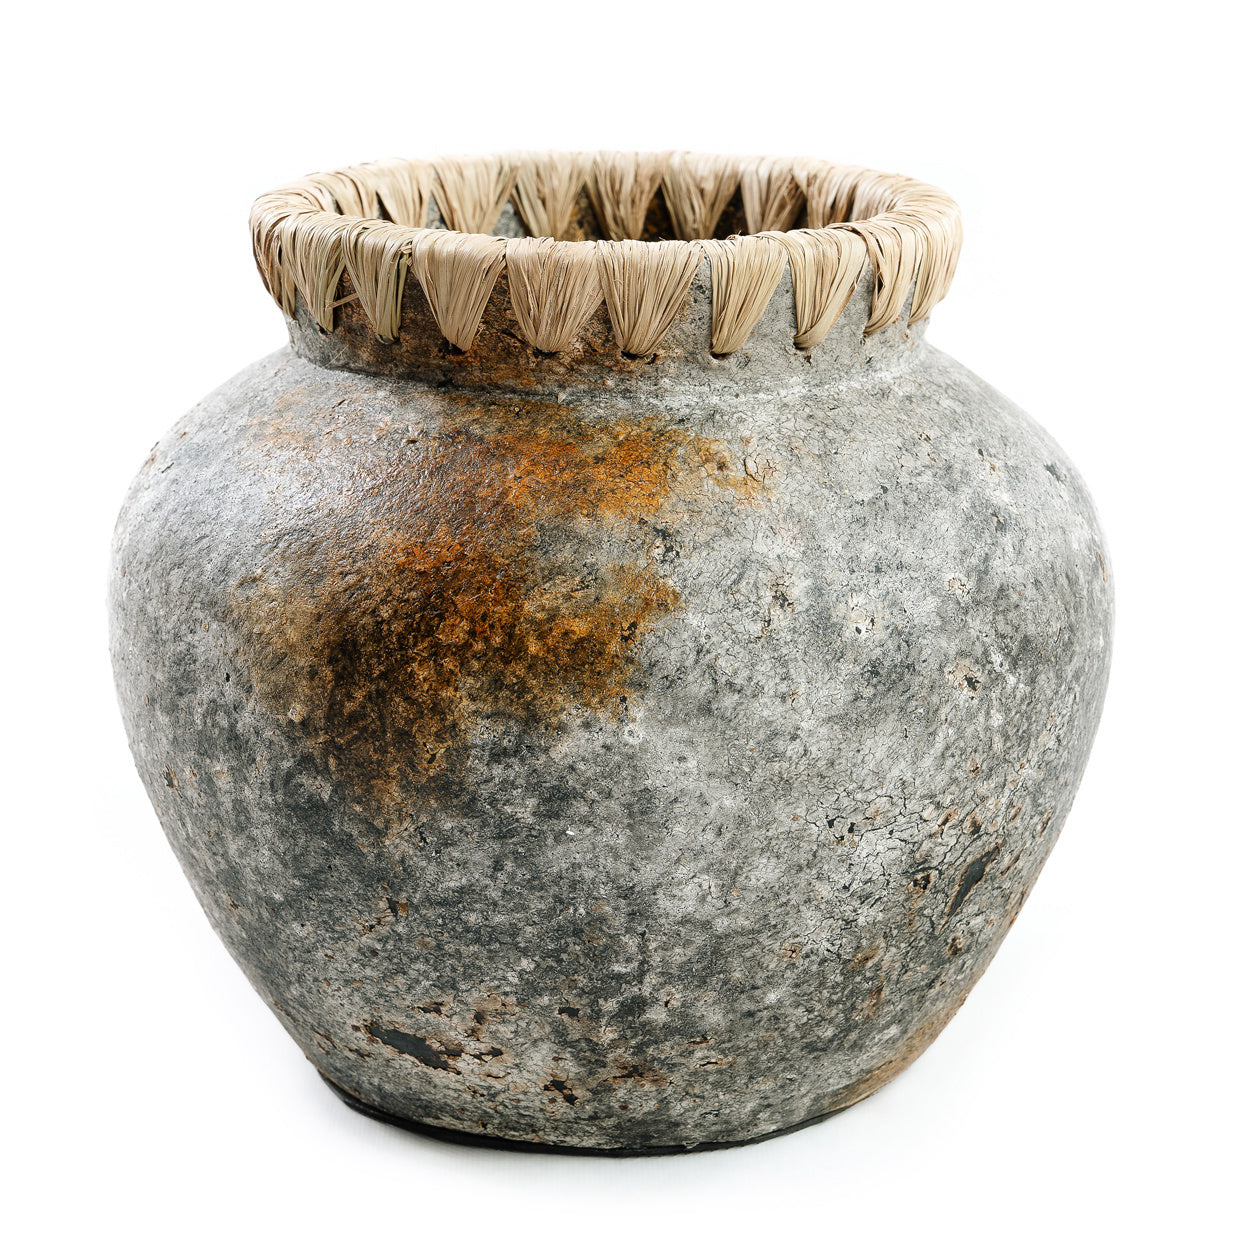 THE STYLY Vase Antique Grey Small